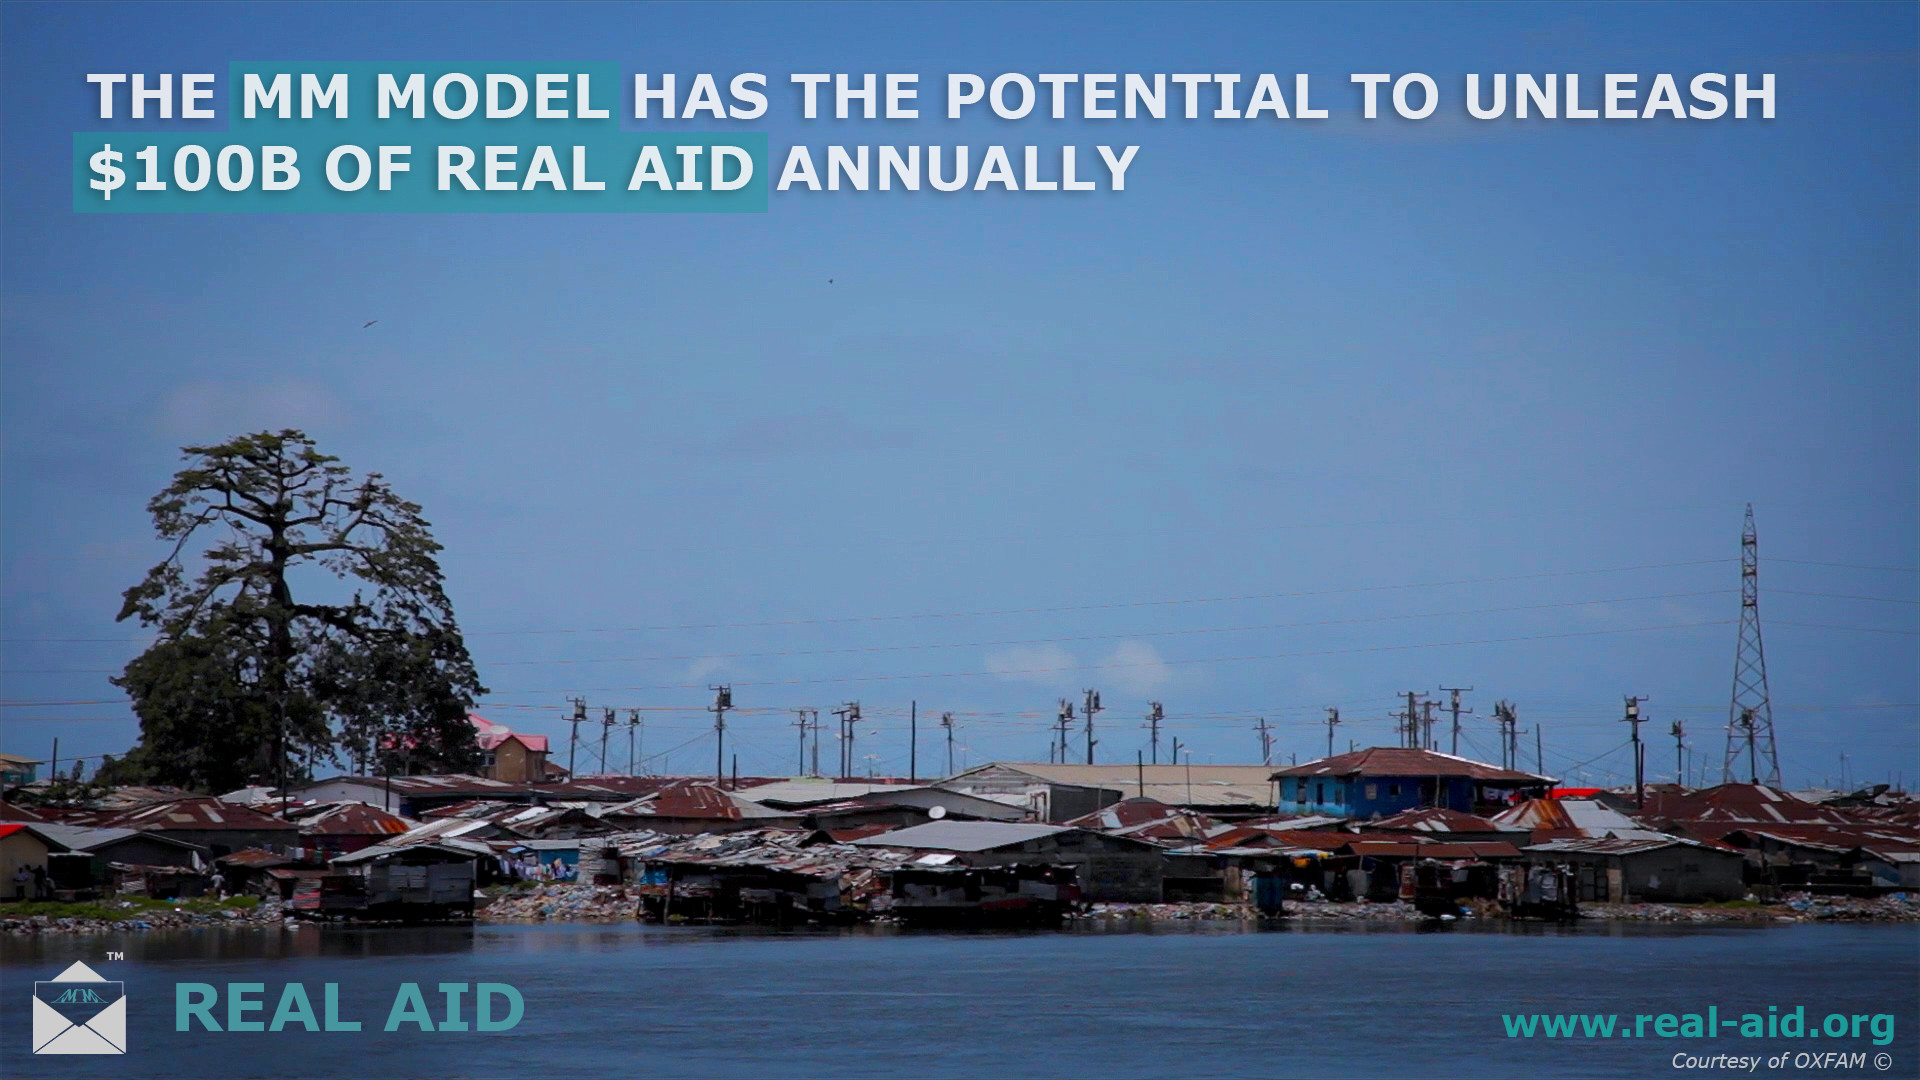 Real Aid poster, "the MM aid model has the potential to release 100 billion of real aid annually", image of slum by water